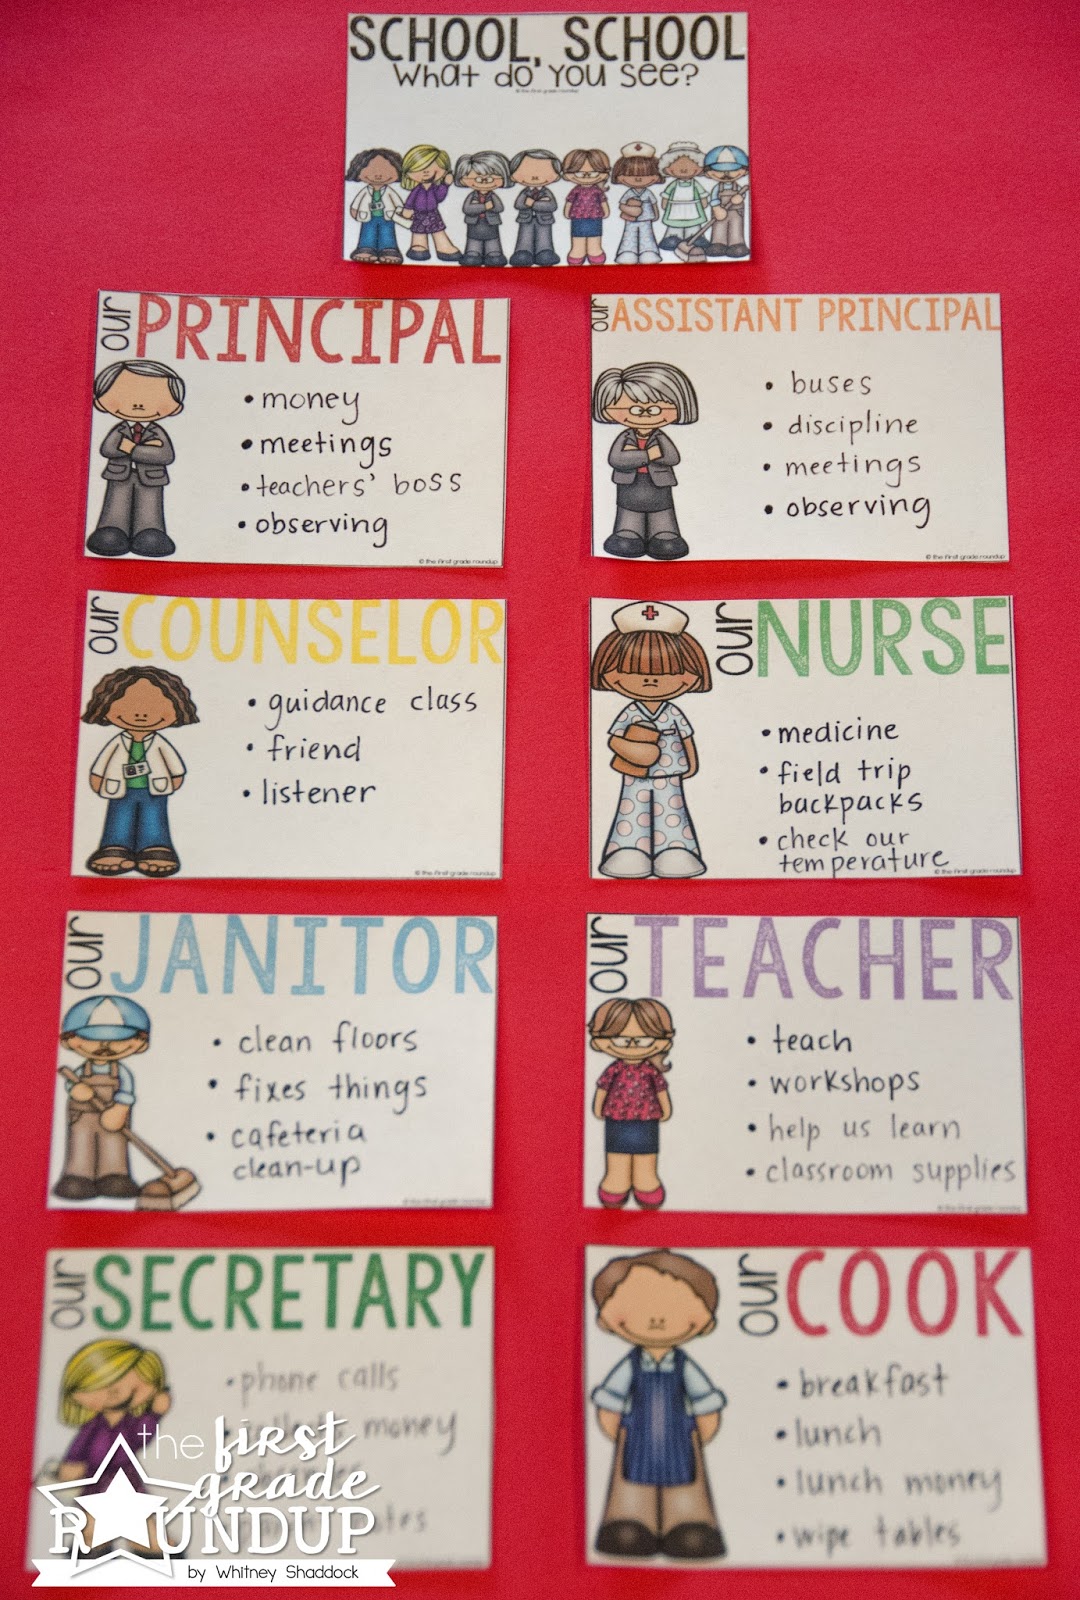 Our Community Helpers Chart